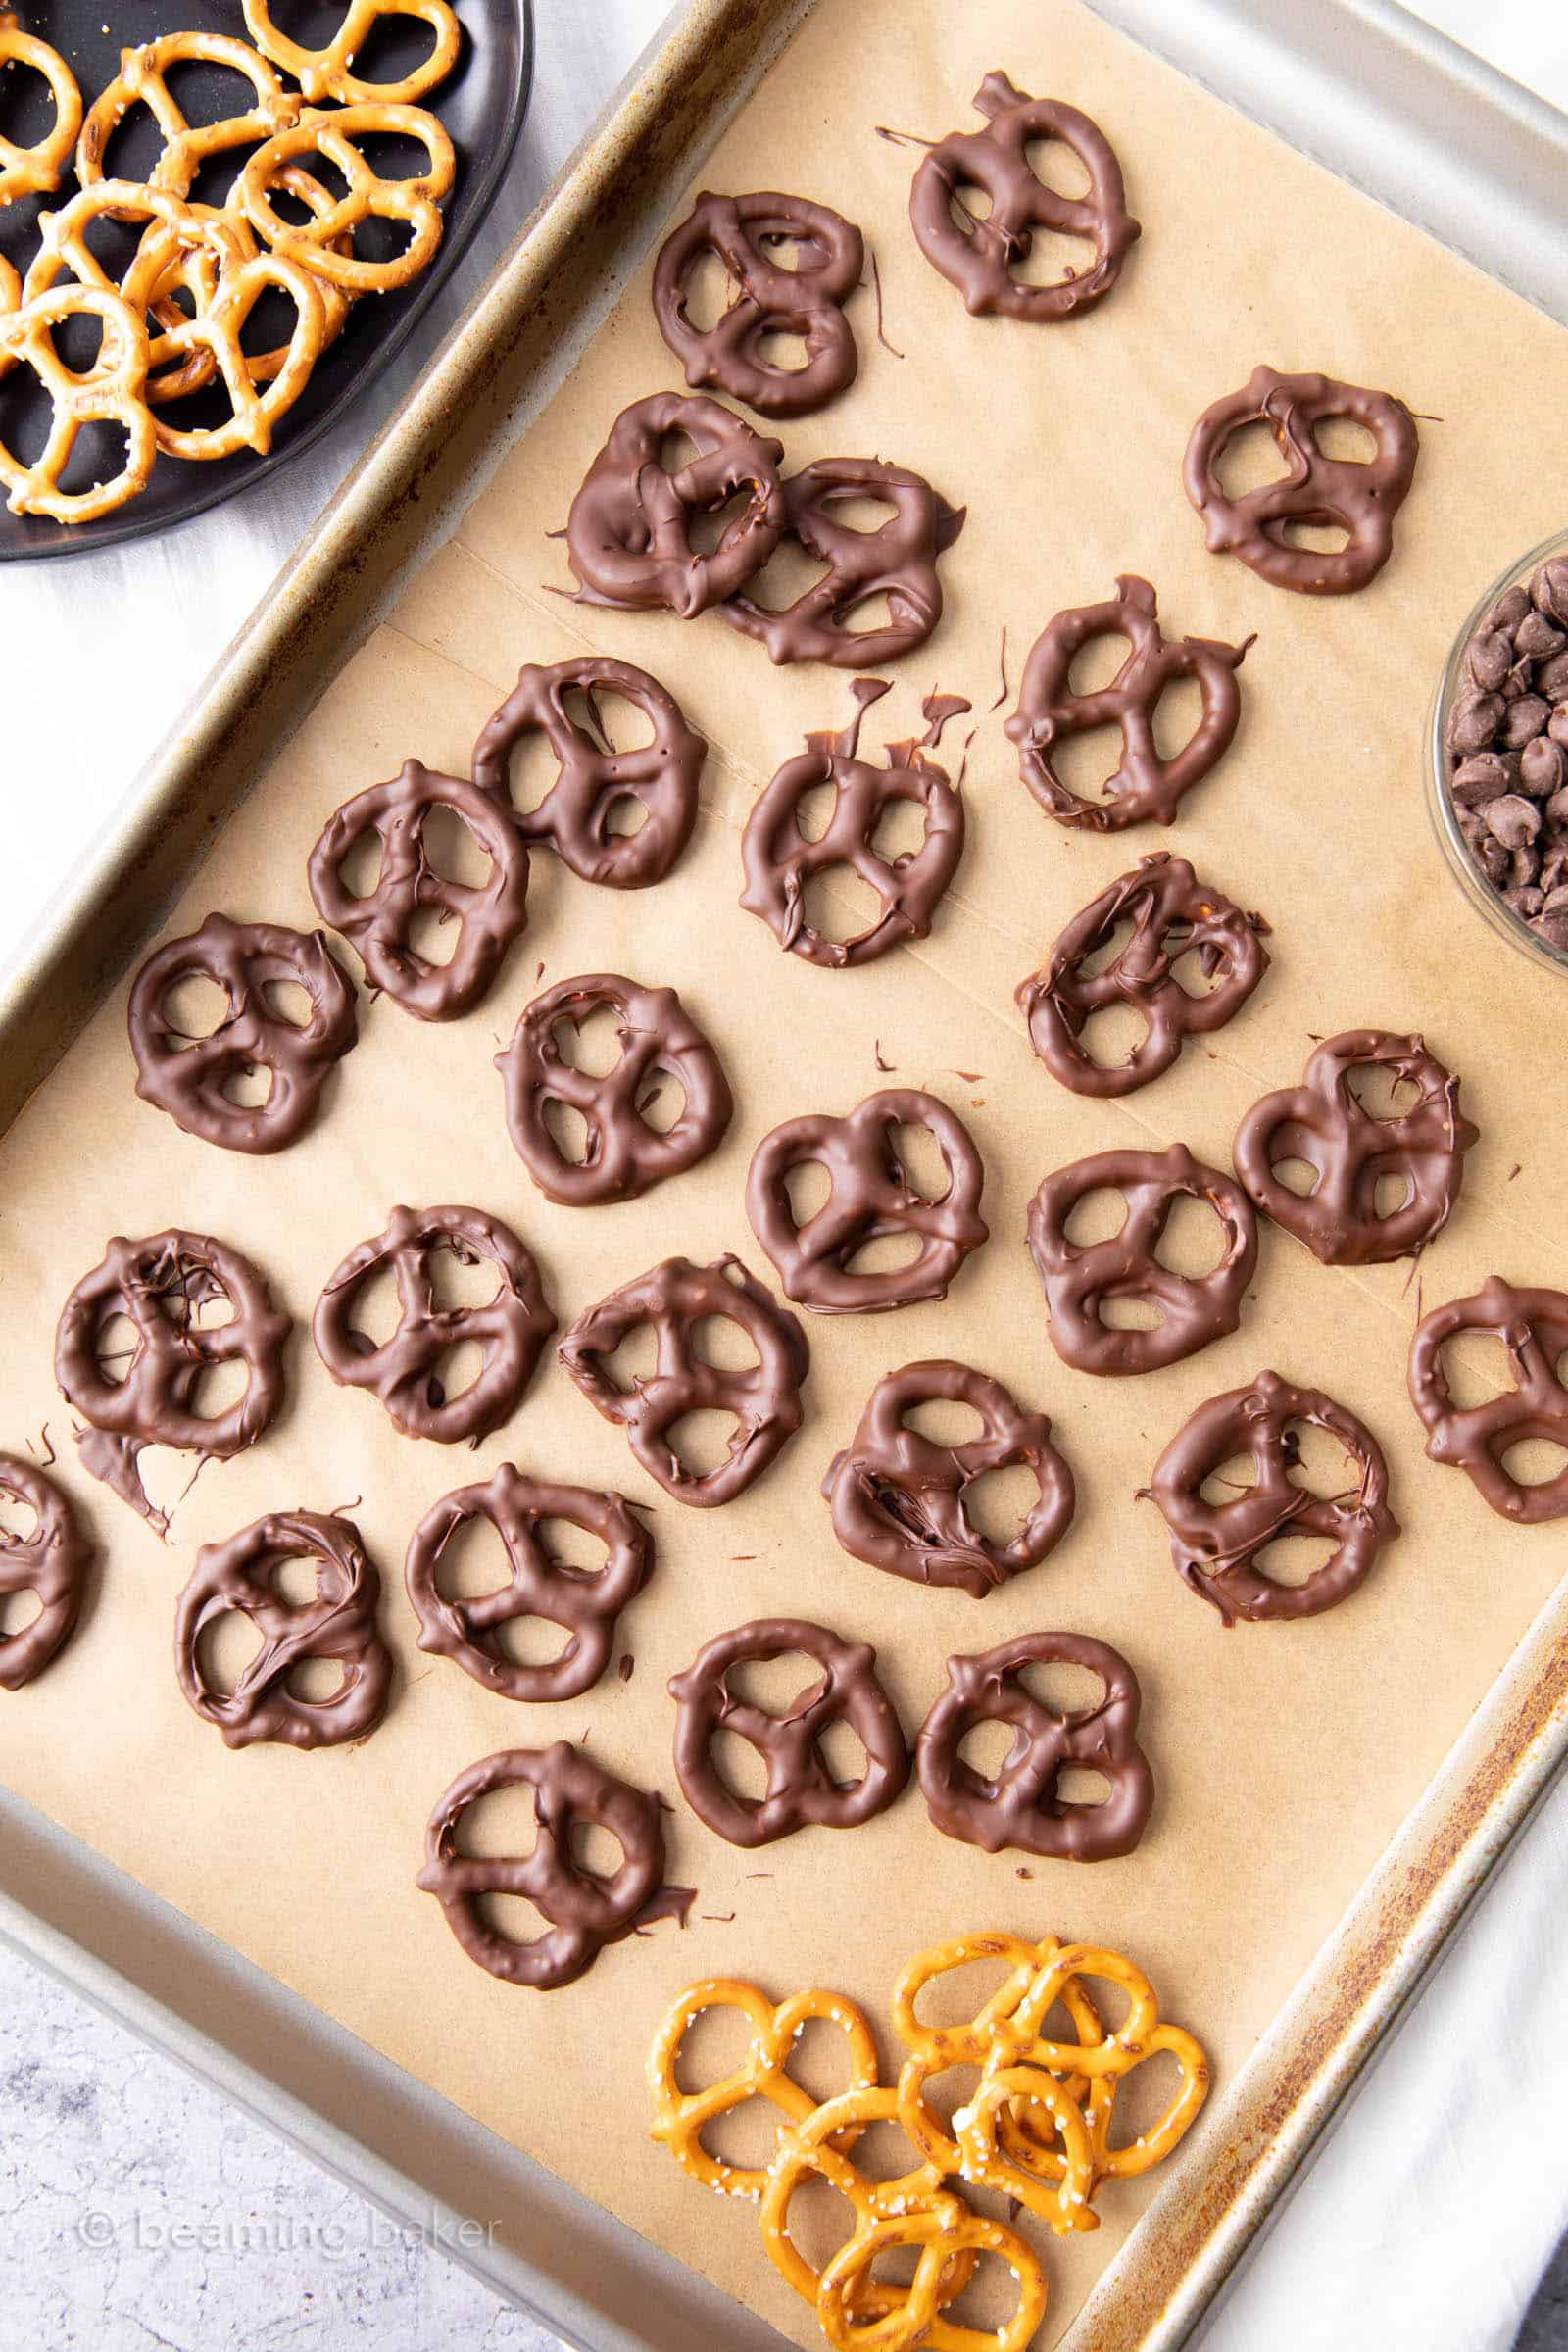 Full sheet of chocolate covered pretzels that have been dipped in chocolate